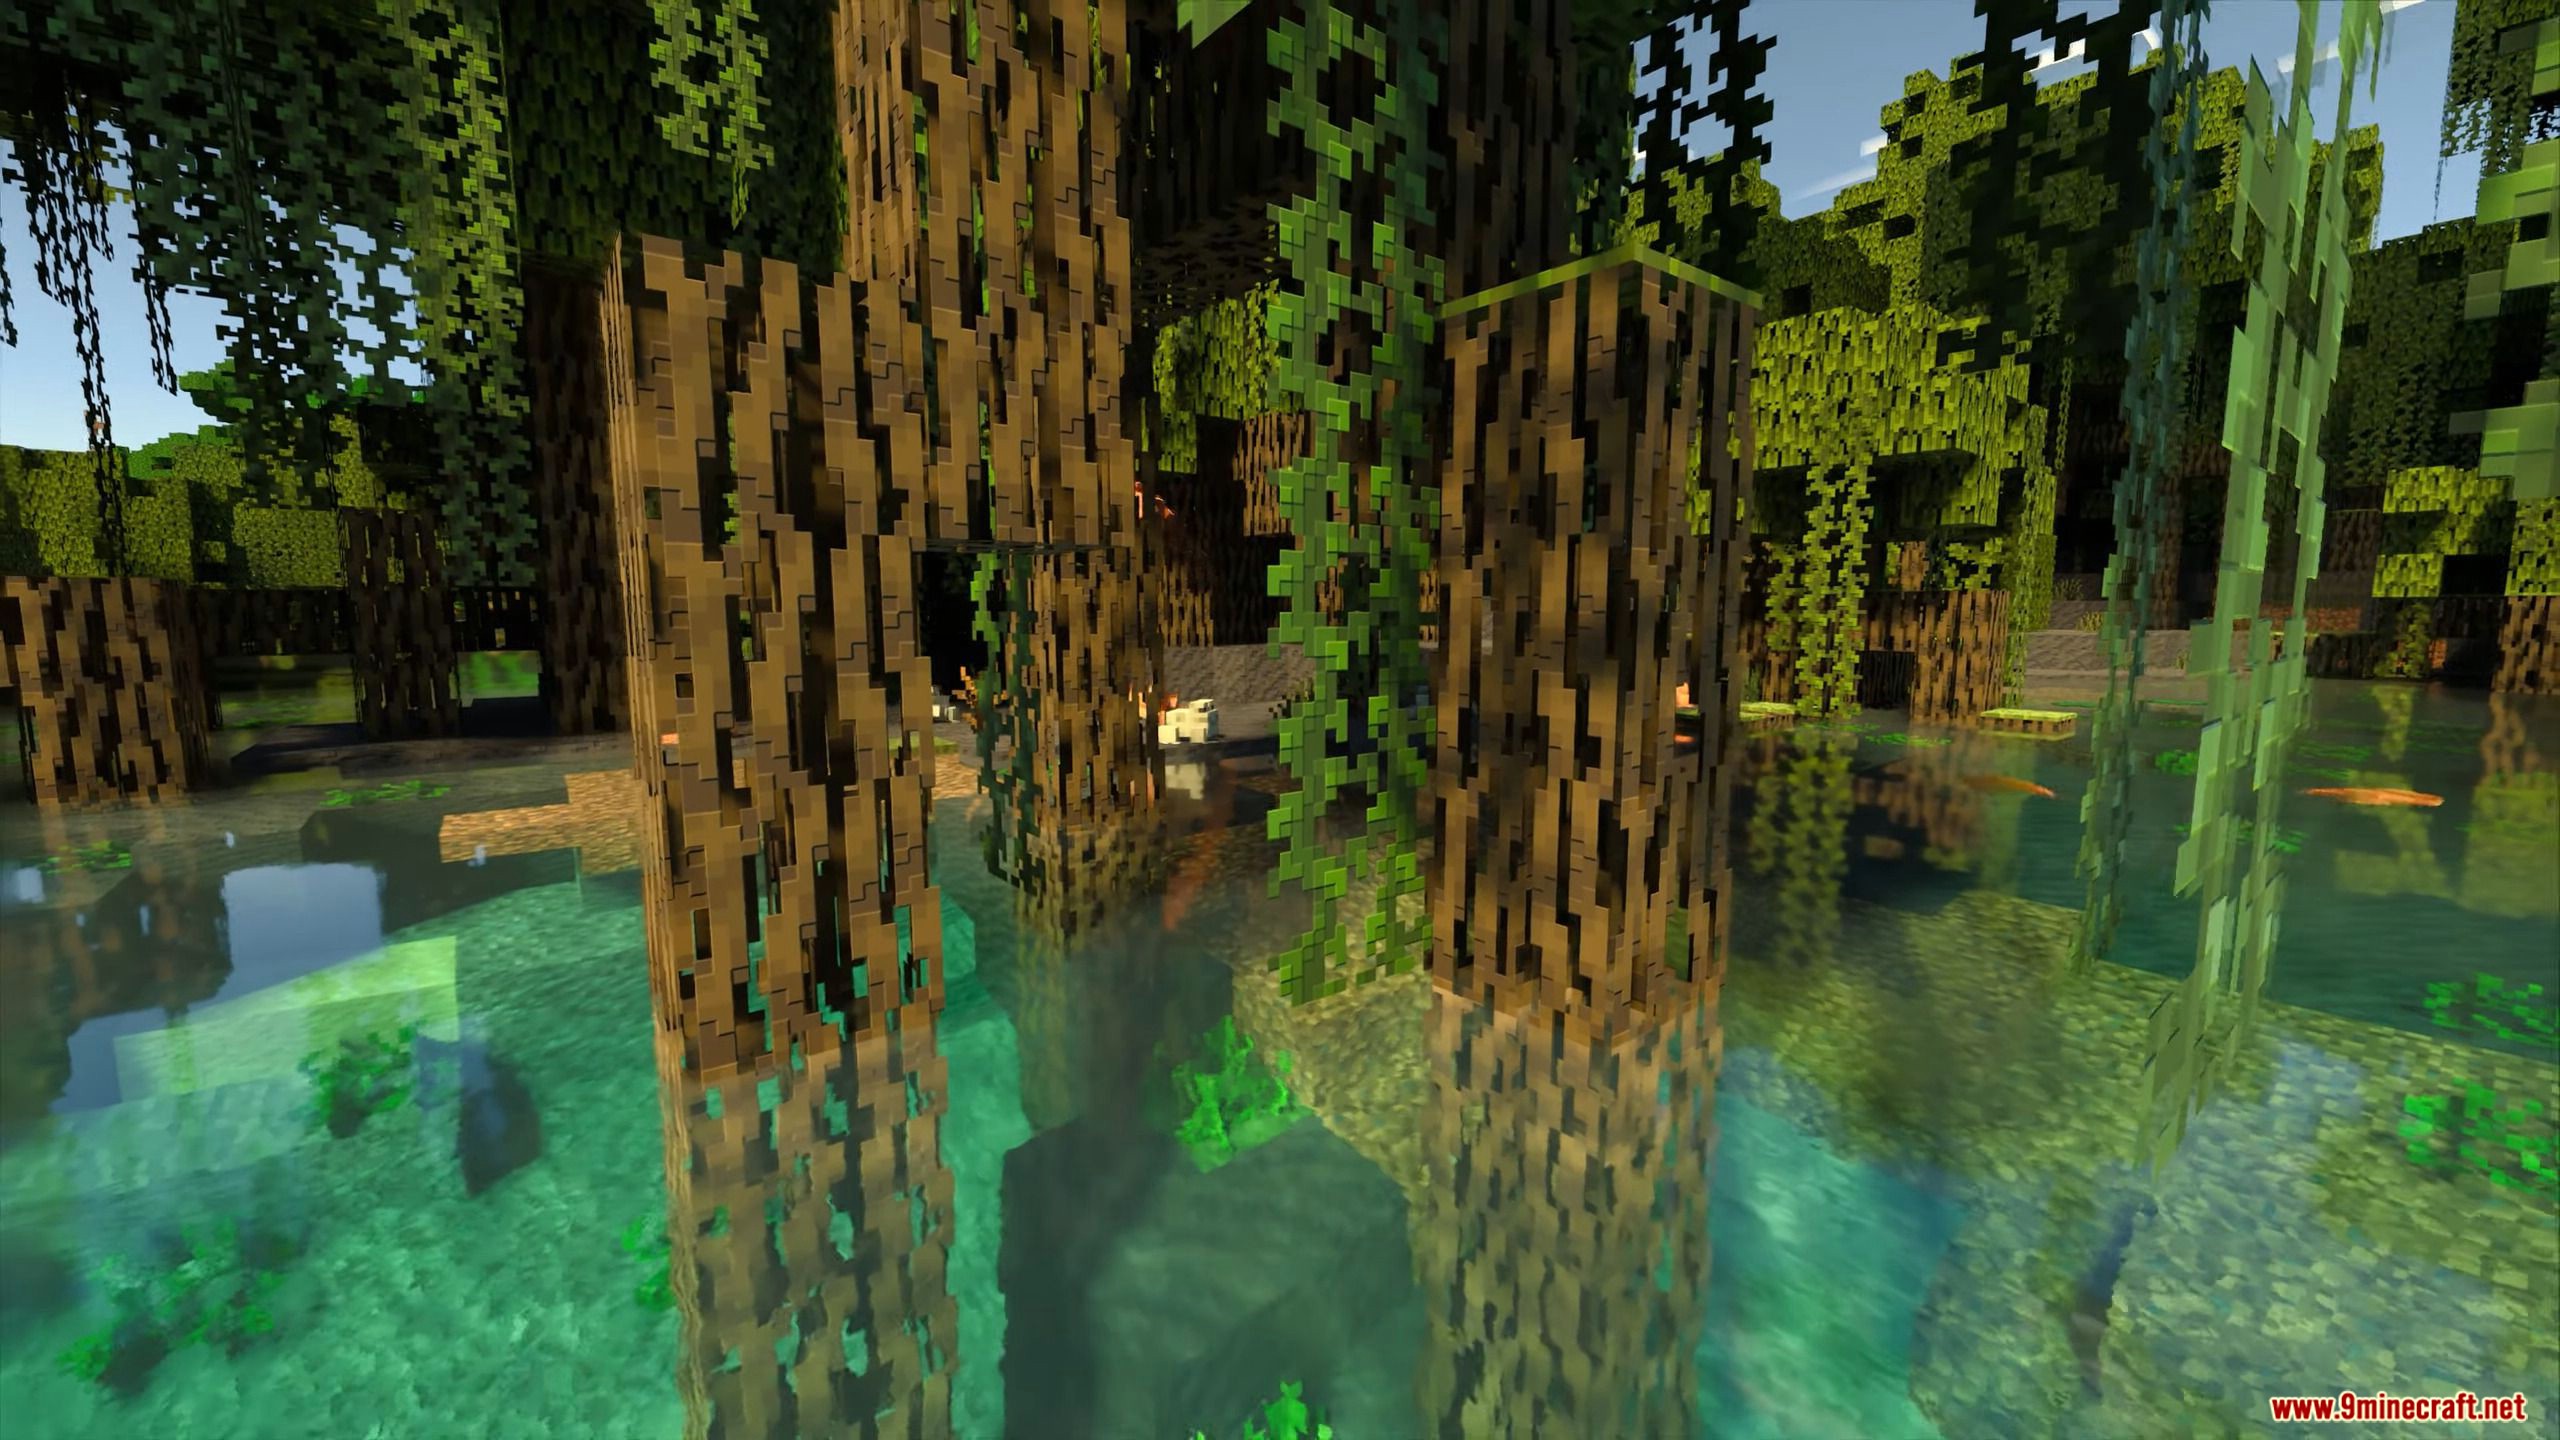 Doey RTX HD Shader (1.19, 1.18) - Realistic Ray Tracing Pack for Bedrock  Edition 